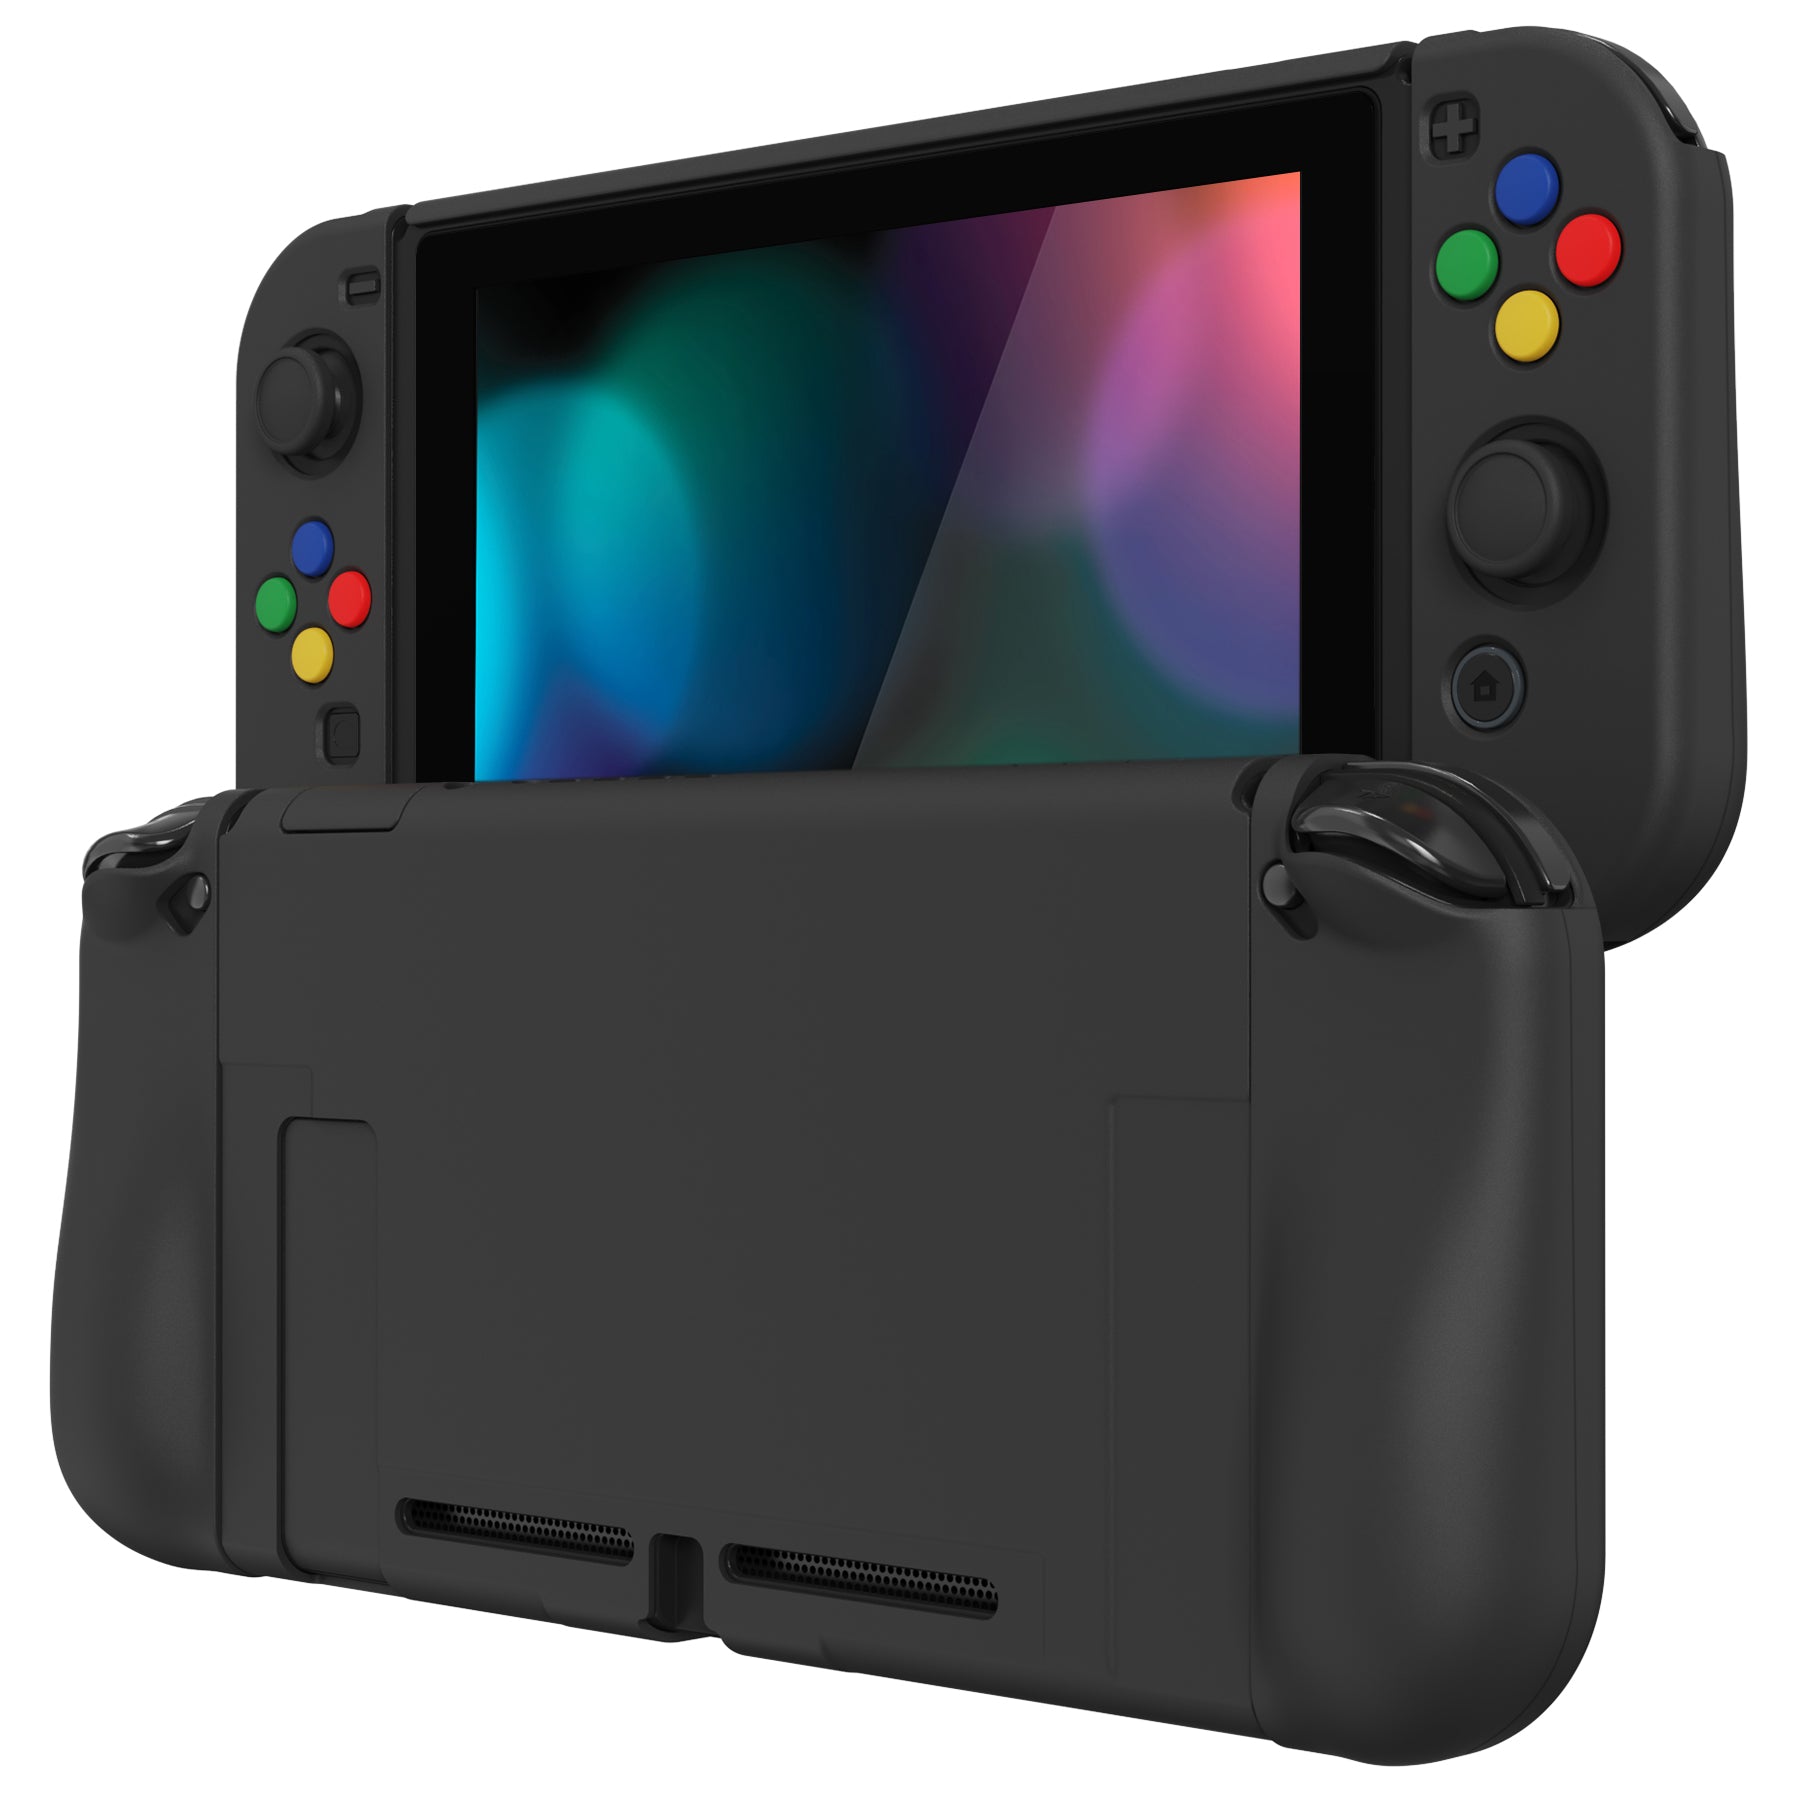 PlayVital AlterGrips Dockable Protective Case Ergonomic Grip Cover for Nintendo Switch, Interchangeable Joycon Cover w/Screen Protector & Thumb Grip Caps & Button Caps - Black - TNSYP3011 playvital